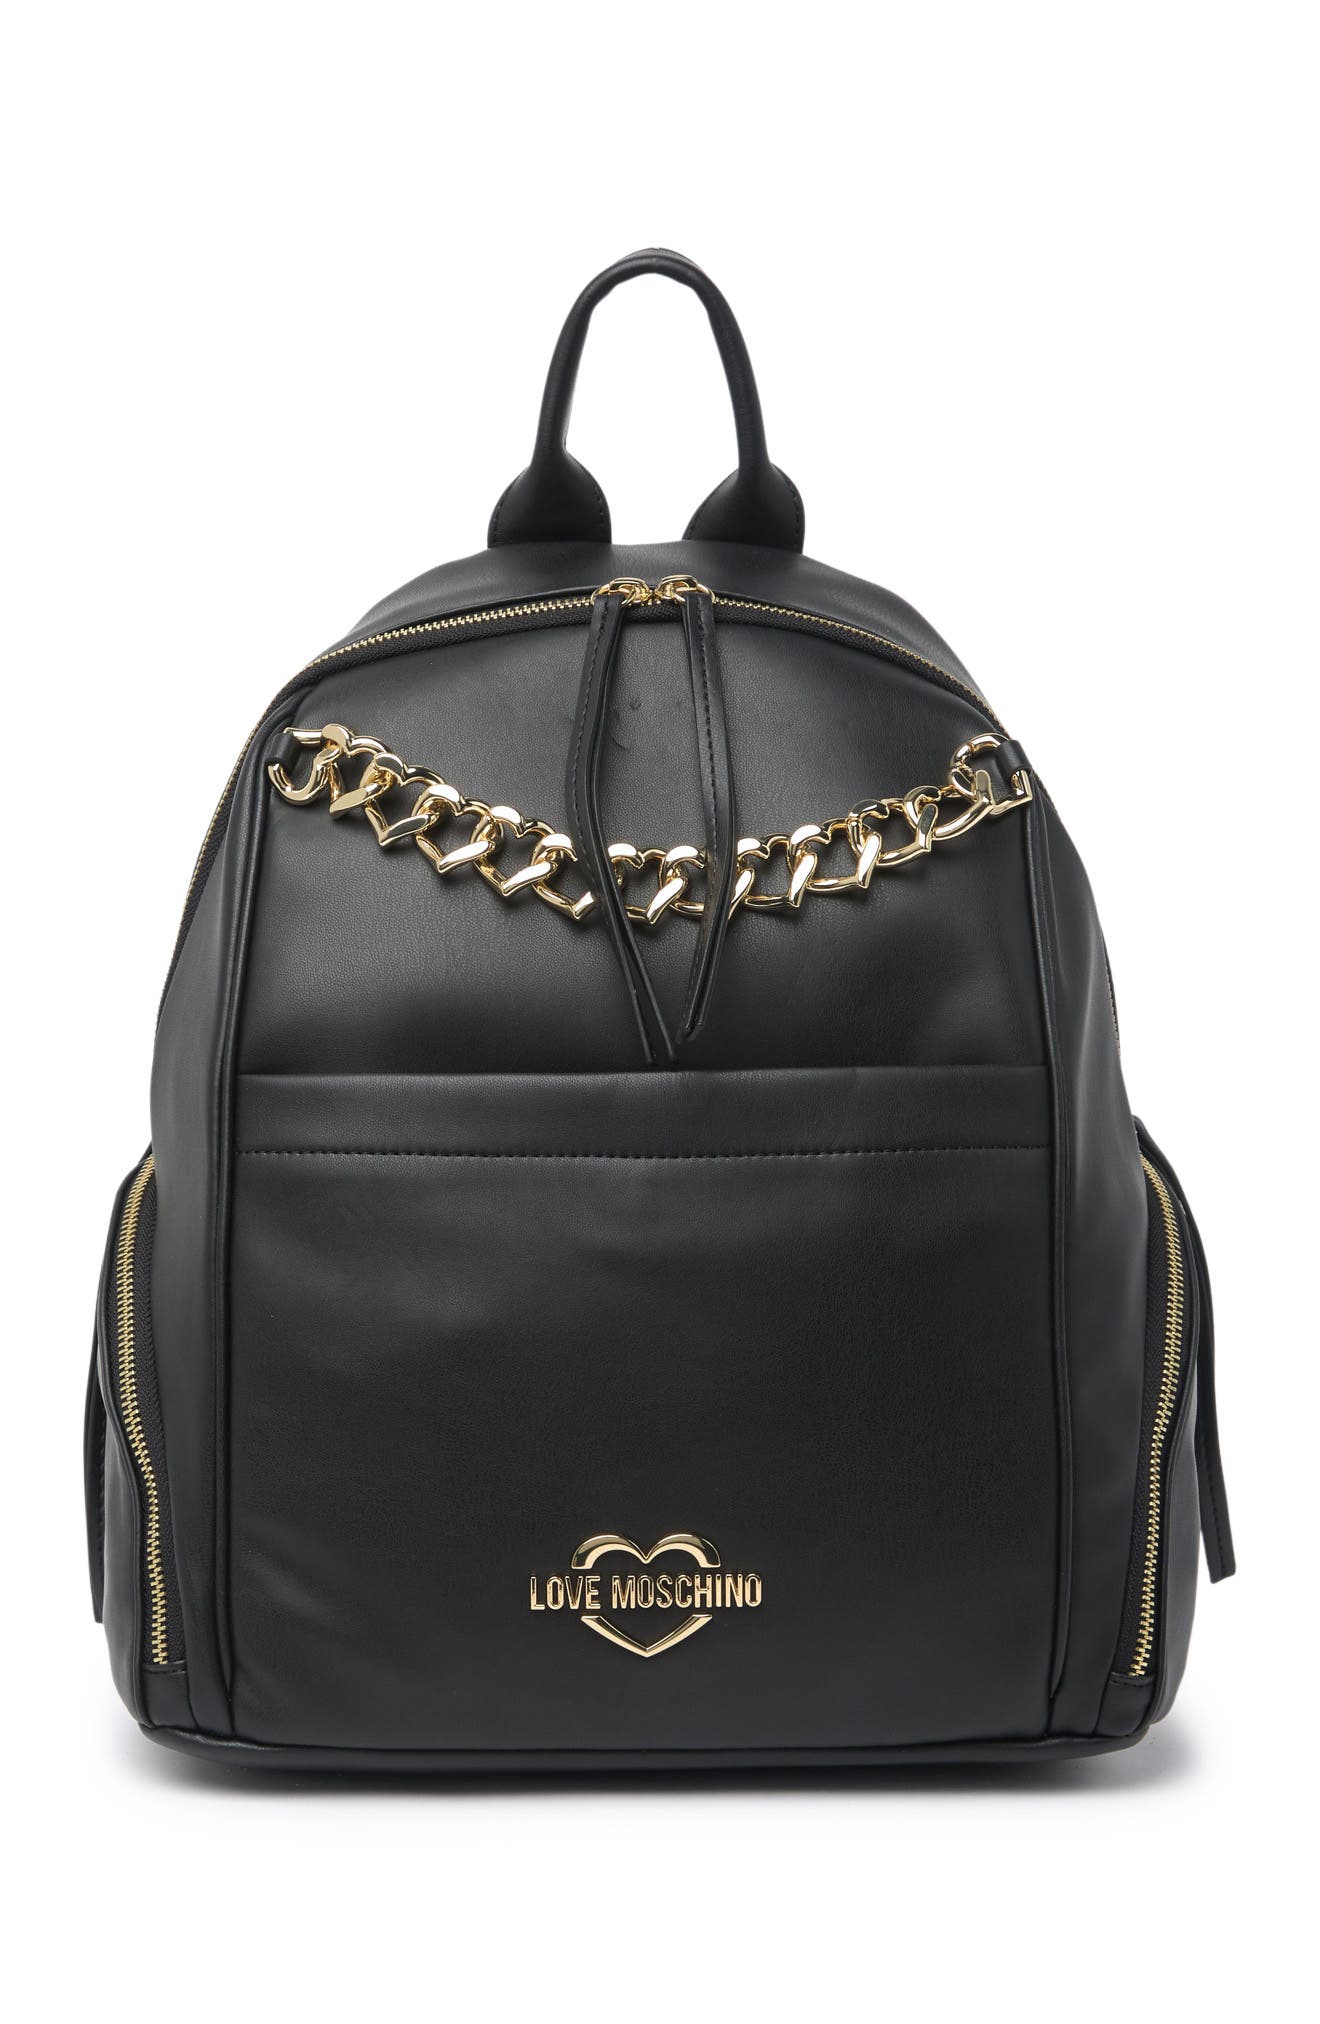 LOVE MOSCHINO HEART CHAIN LEATHER BACKPACK,439087627570